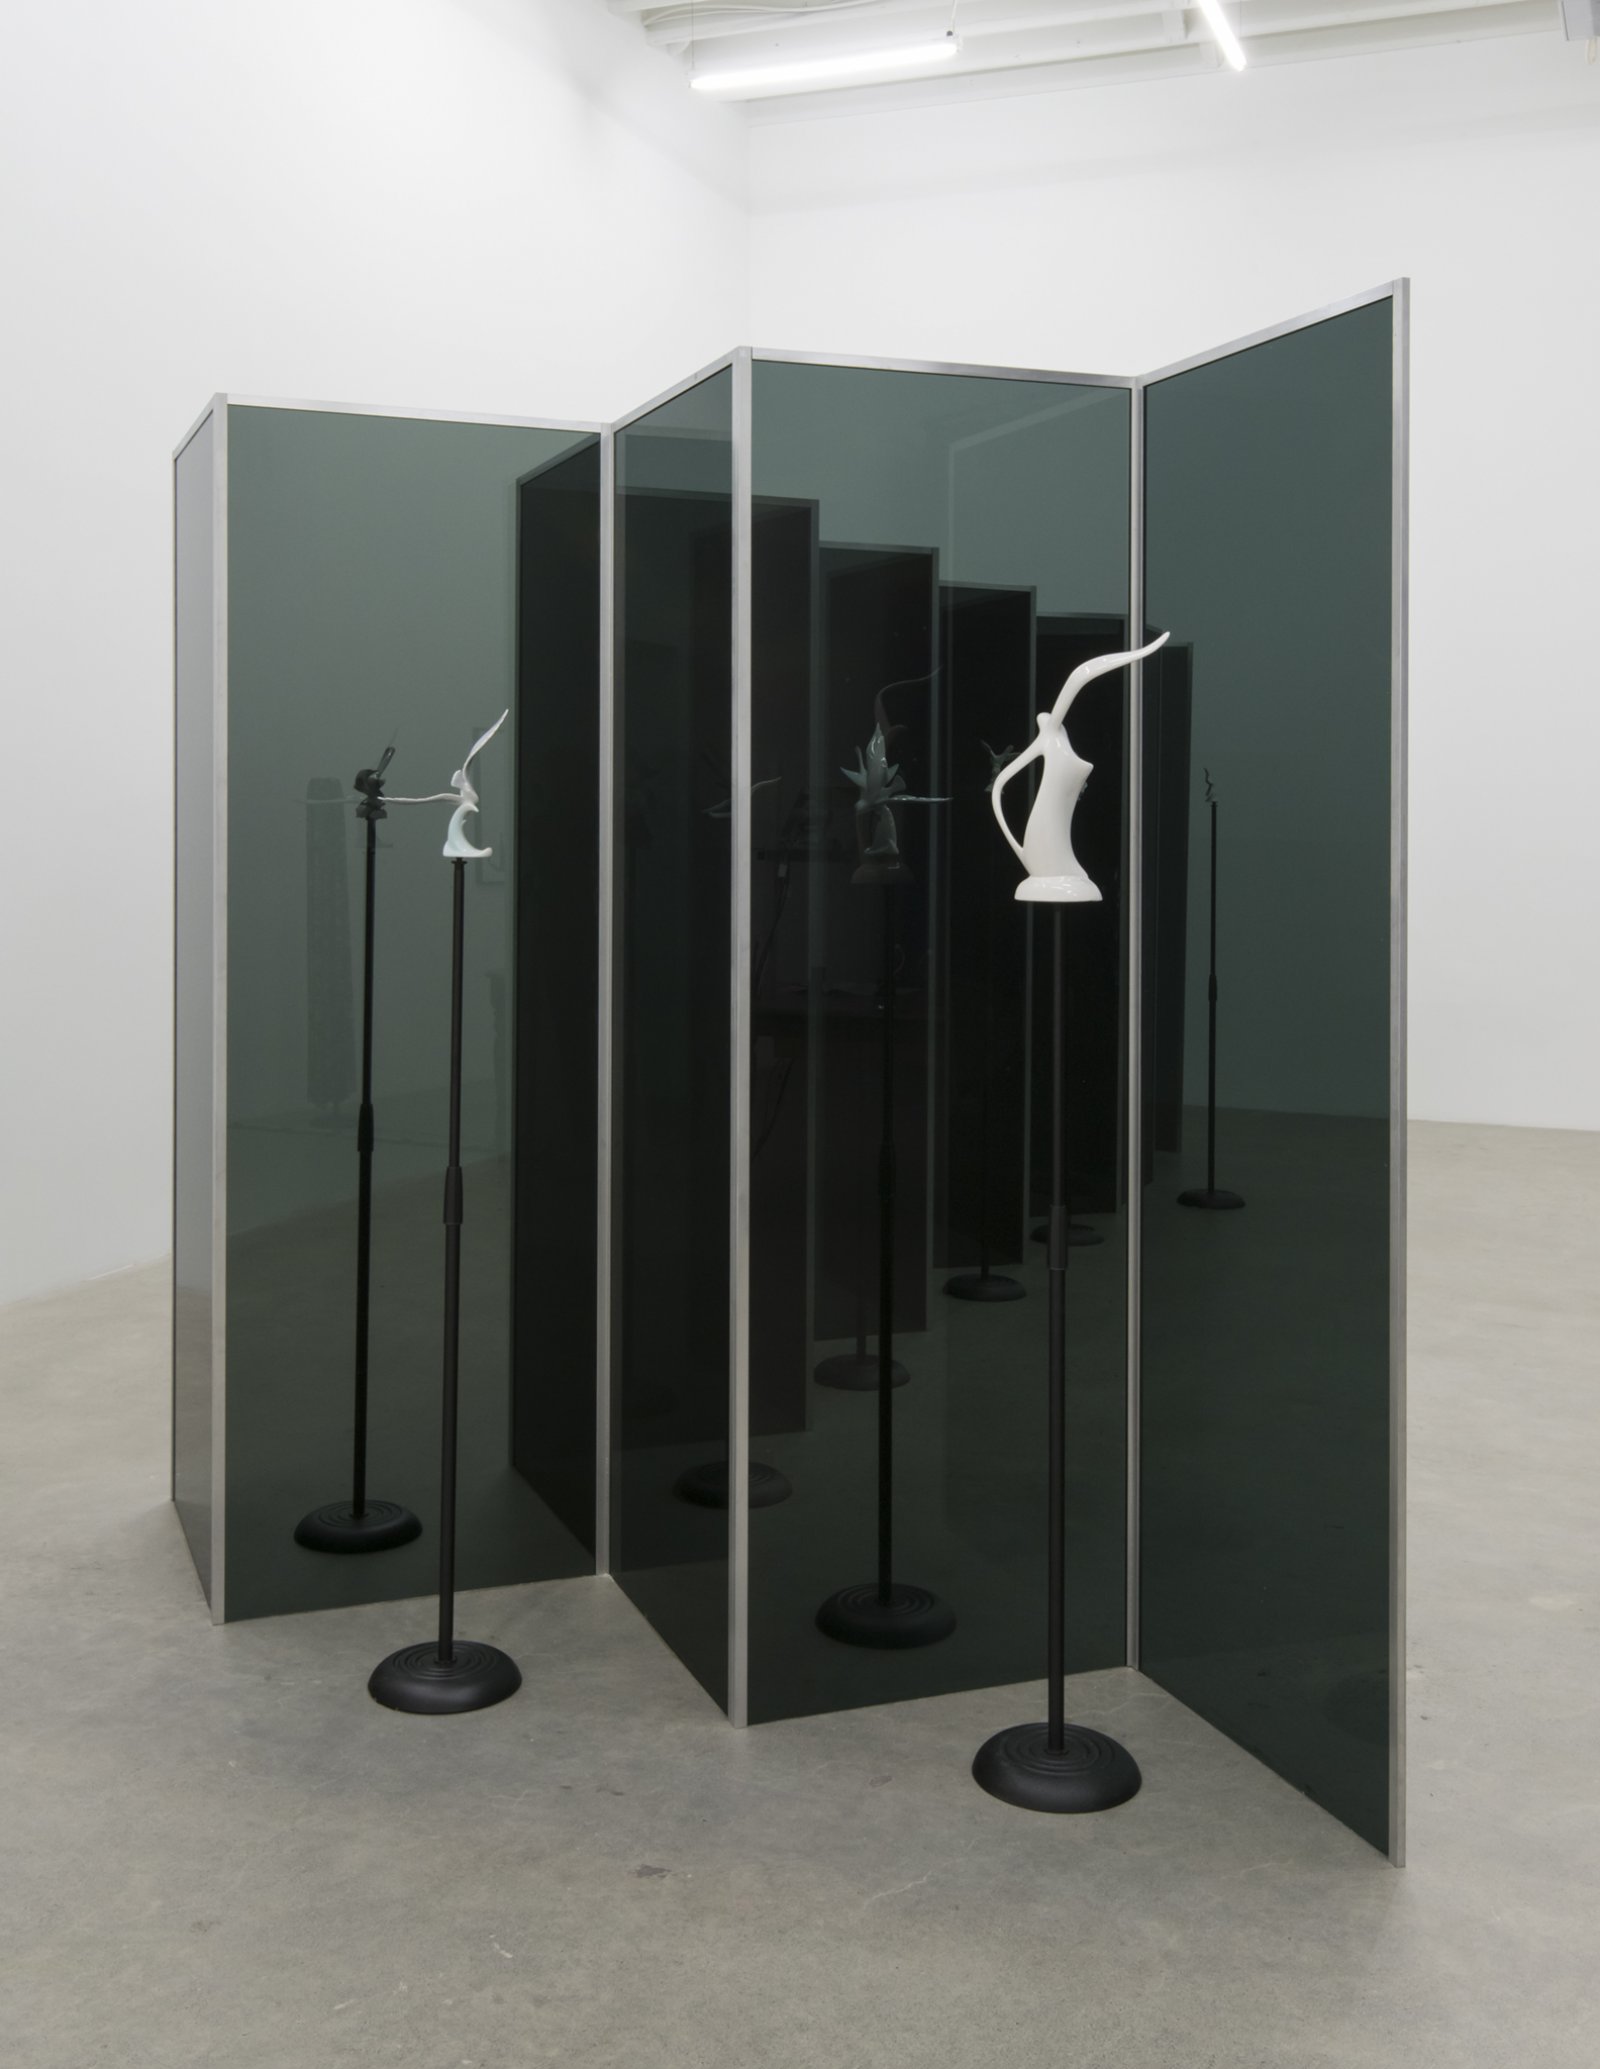 ​​Judy Radul, Connector Divider (Hawks, Sparrows, Pigeons, Doves, Ducks, Eagles), 2018, salvaged glass, aluminum, found ceramic figurines, microphone stands, dimensions variable​​​ by Judy Radul